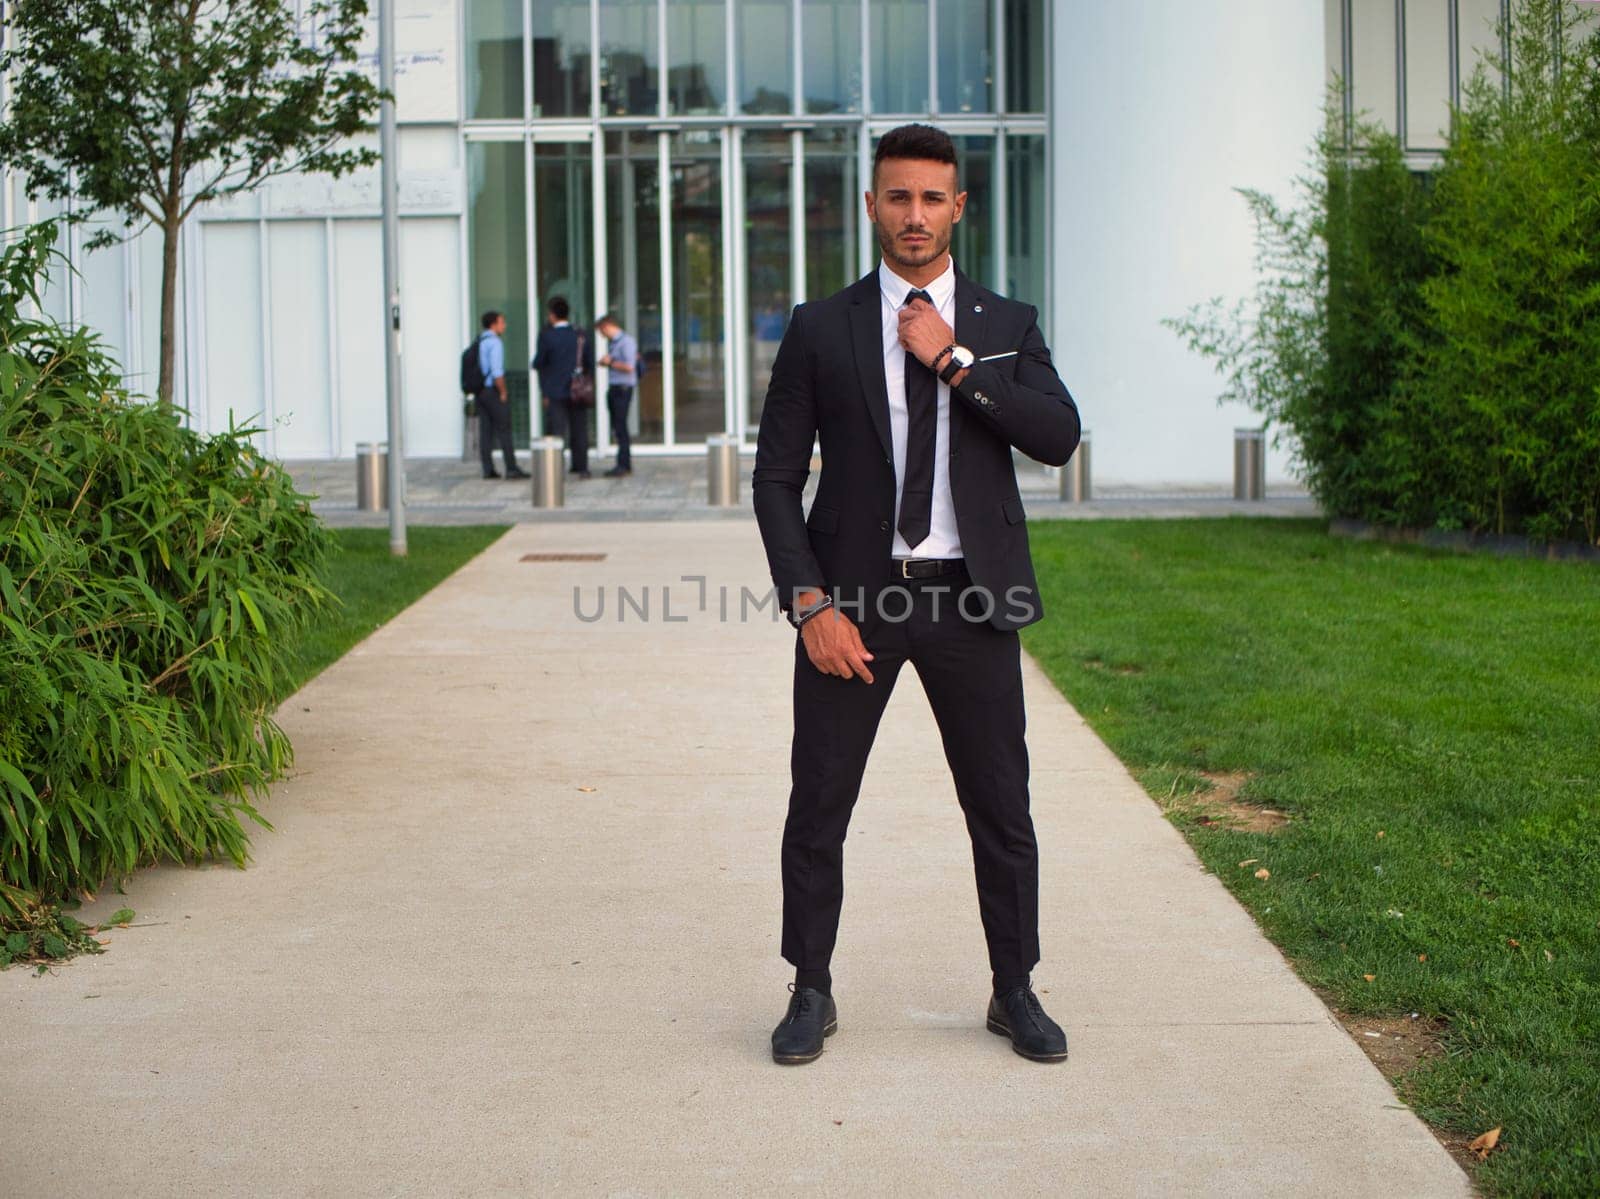 Portrait of stylish young man wearing business suit, standing in modern city setting